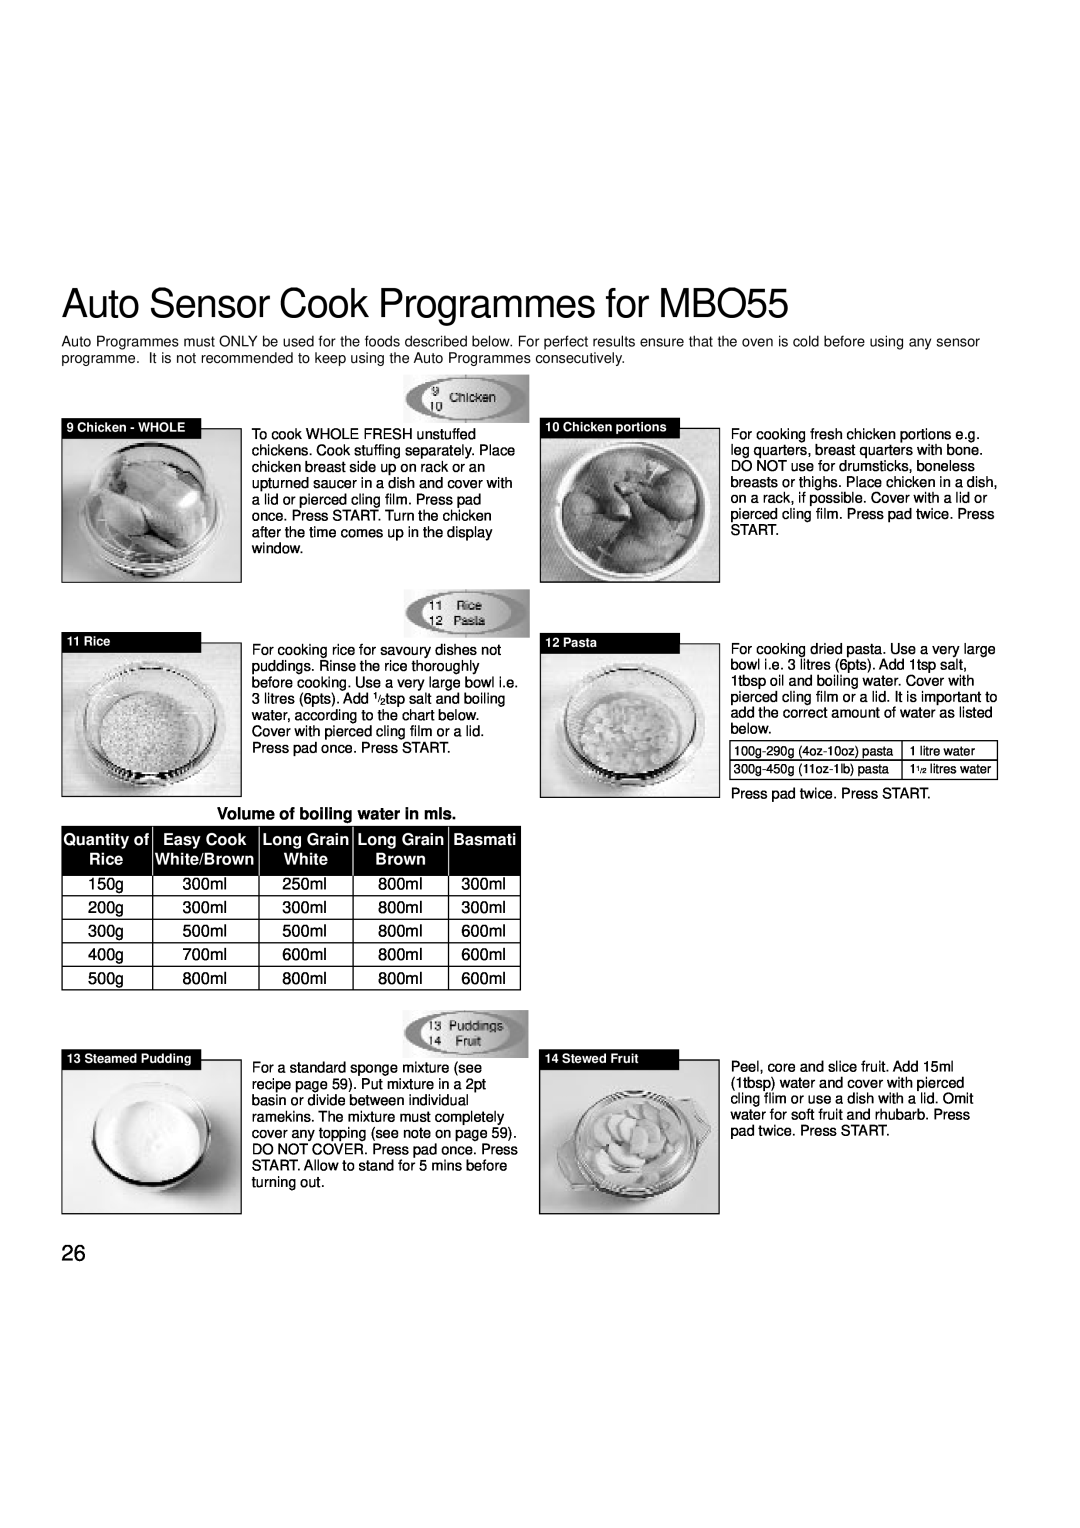 Creda Auto Sensor Cook Programmes for MBO55, Volume of boiling water in mls, Quantity of, Easy Cook, Rice, White/Brown 